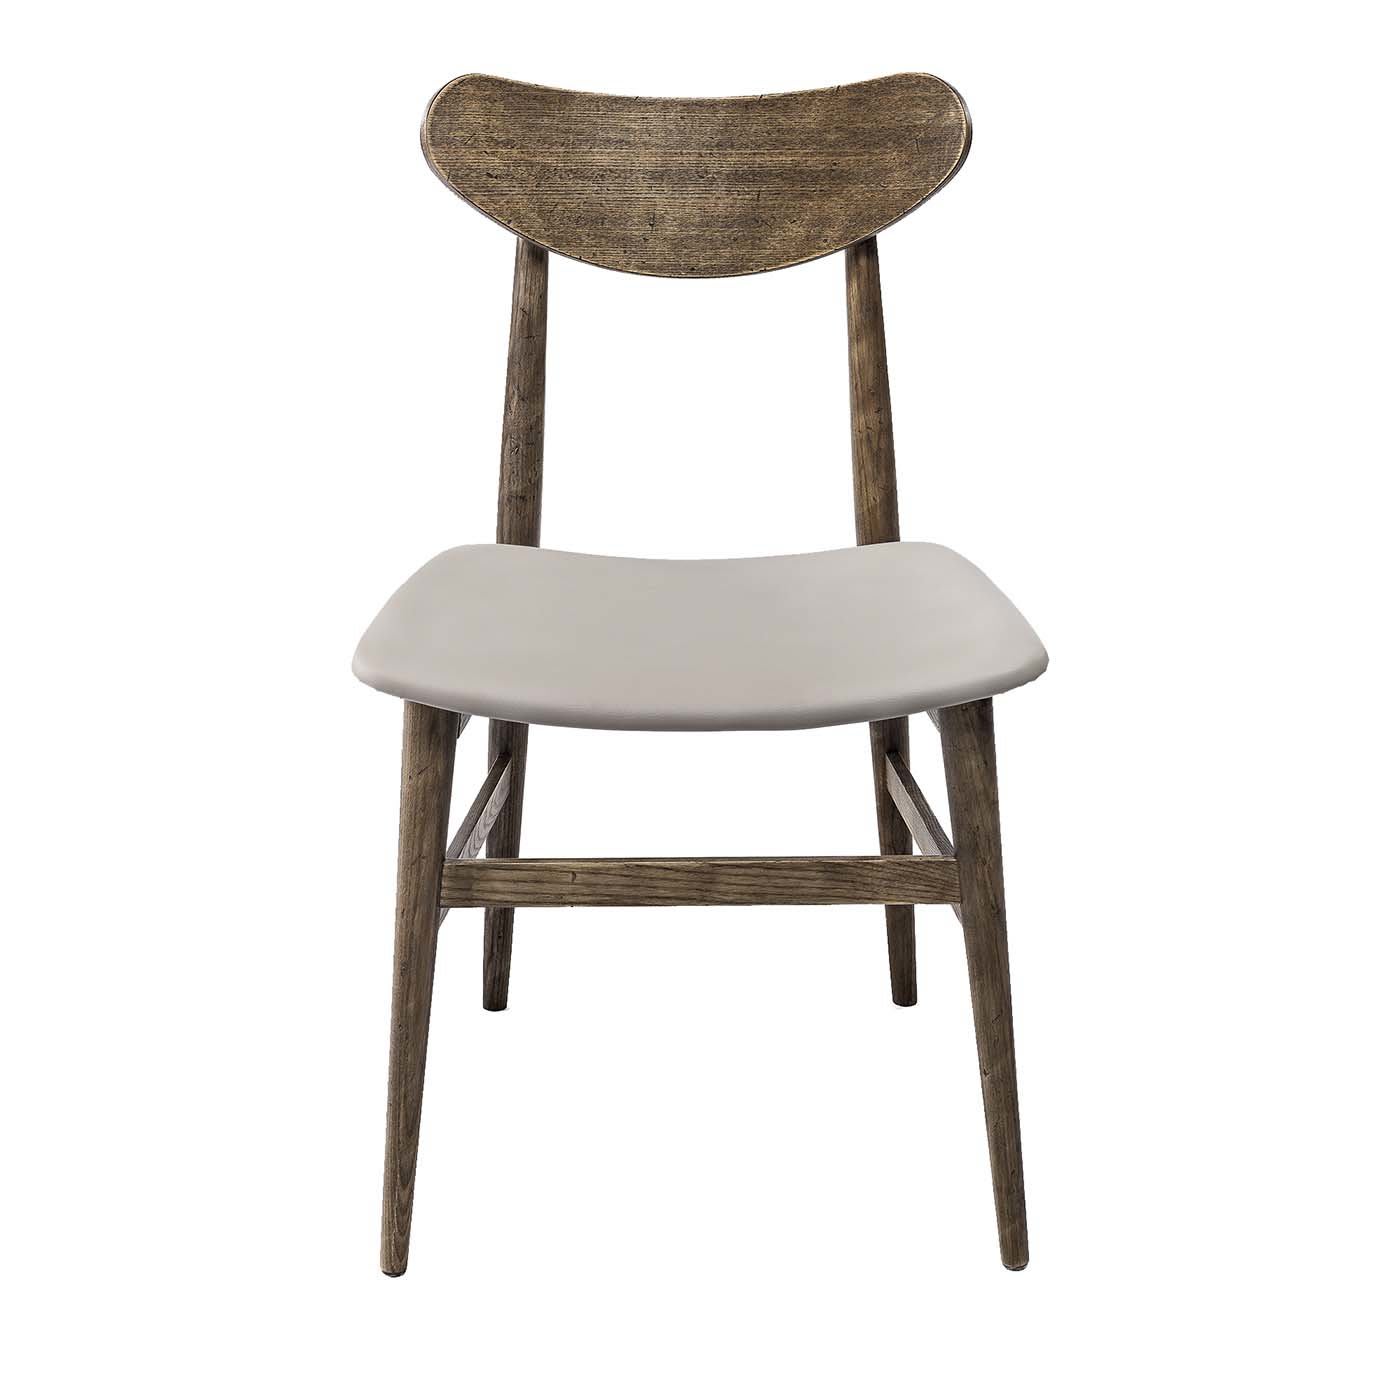 Arched-Back Chair - Buying & Design